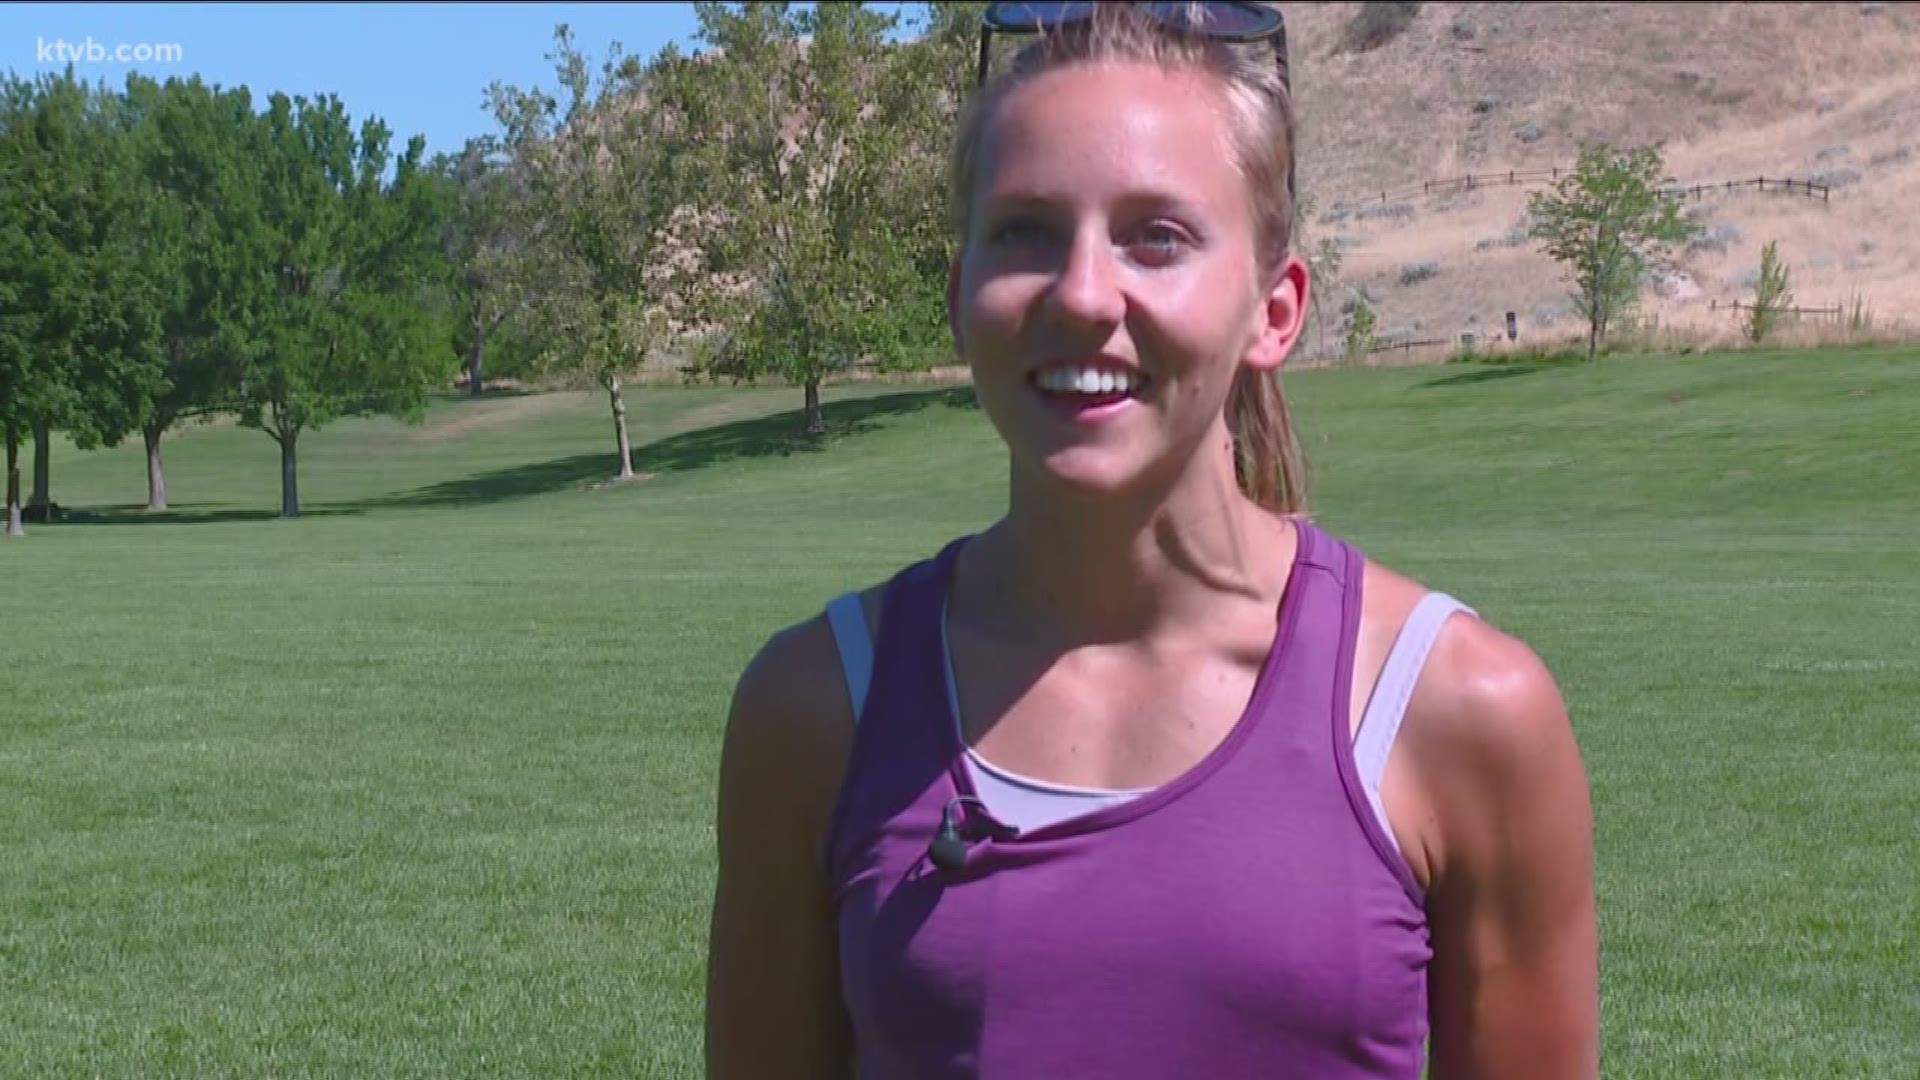 The former Boise State athlete is getting ready to compete at the USA track and field championships.